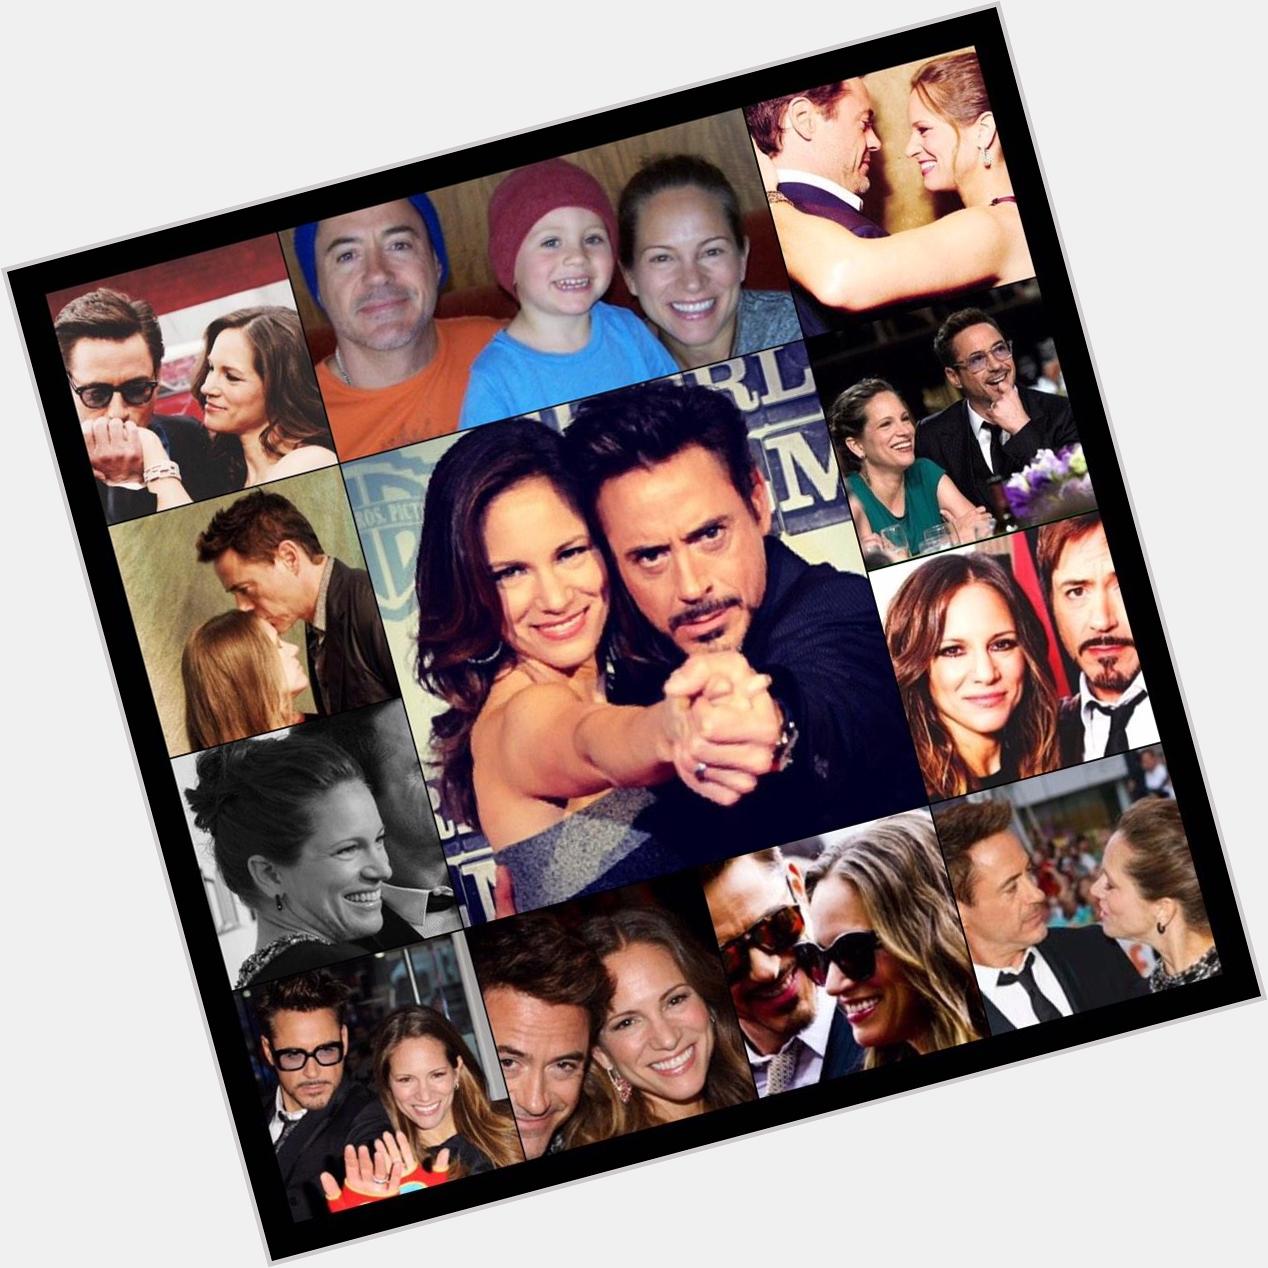 "In my darkest hours she believed in me....she saved me" Happy Birthday to the amazing Susan Downey! 